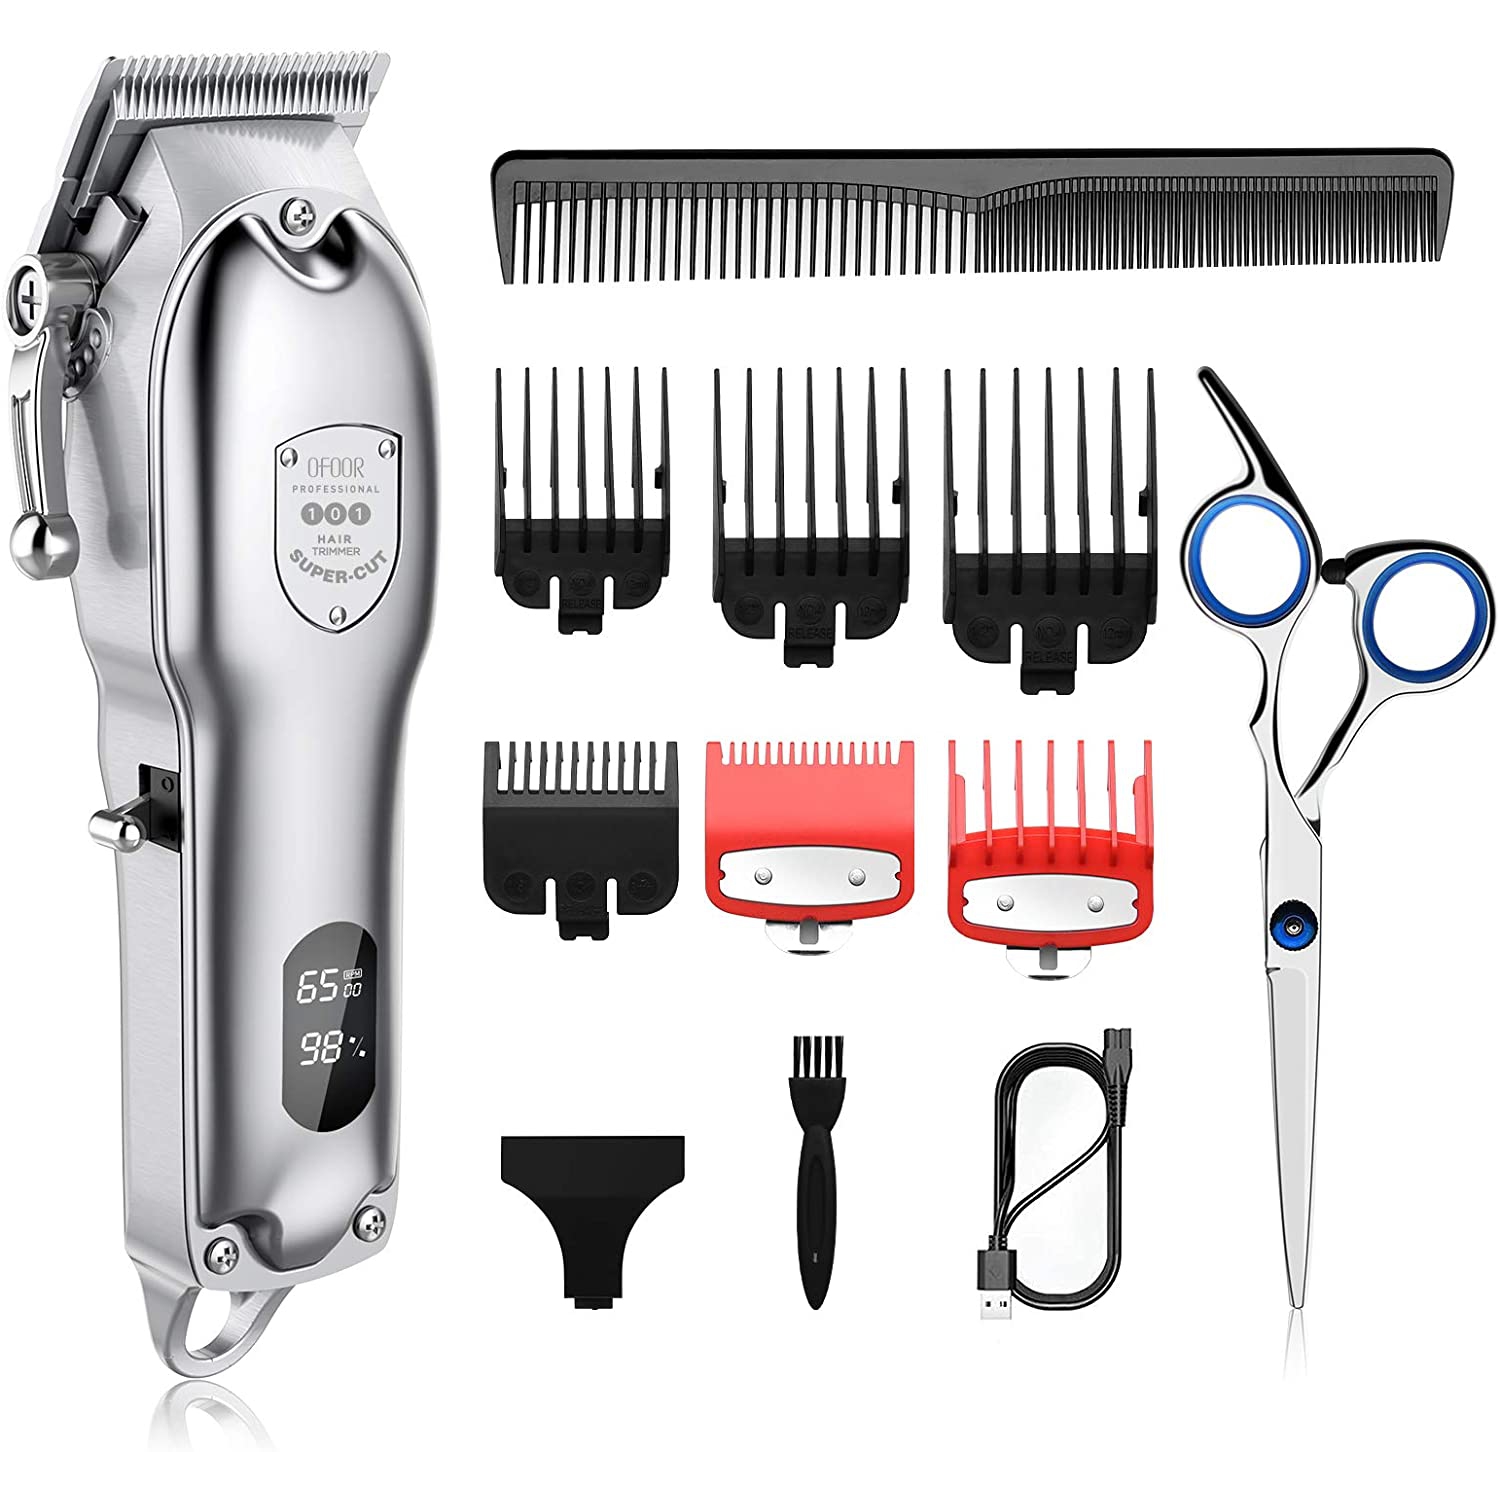 Professional Hair Clippers for Men with Scissors & LED Display - Rechargeable Cordless Haircutting Beard Trimmer Electric Barbers Grooming Set （Silver）